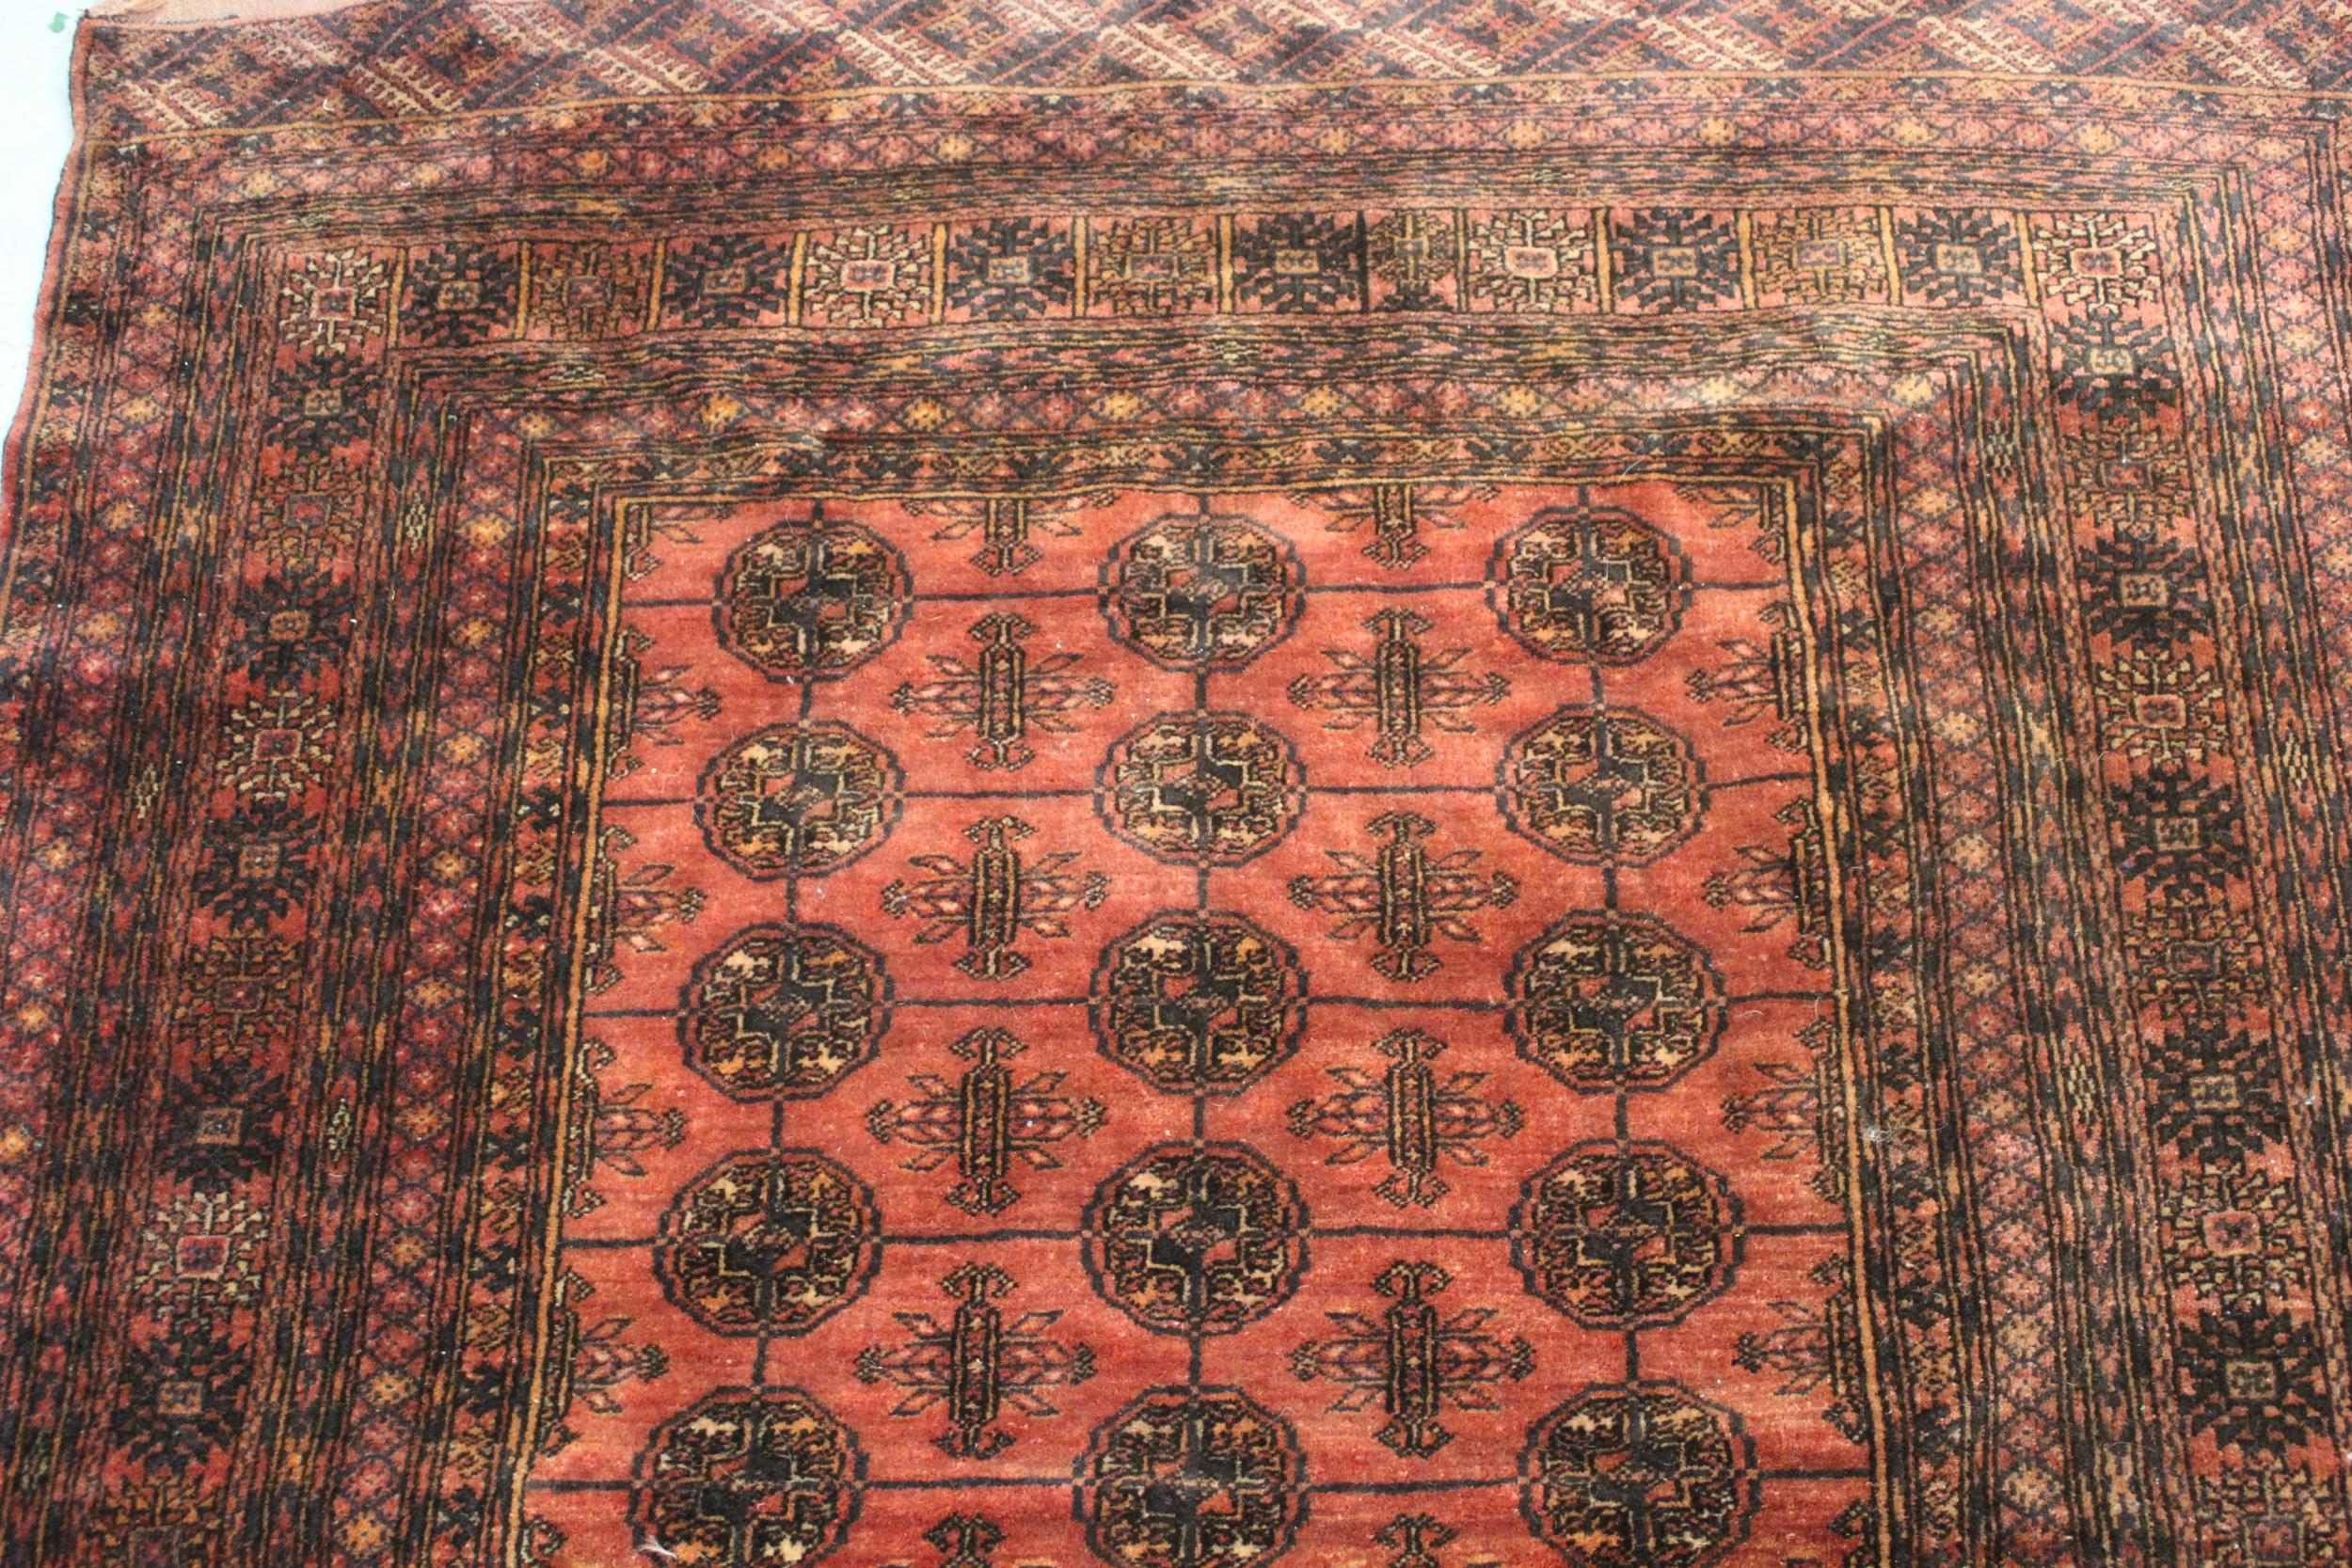 Modern Turkoman rug with three rows of ten gols on a wine ground, with multiple border, 6ft x 4ft - Image 3 of 4